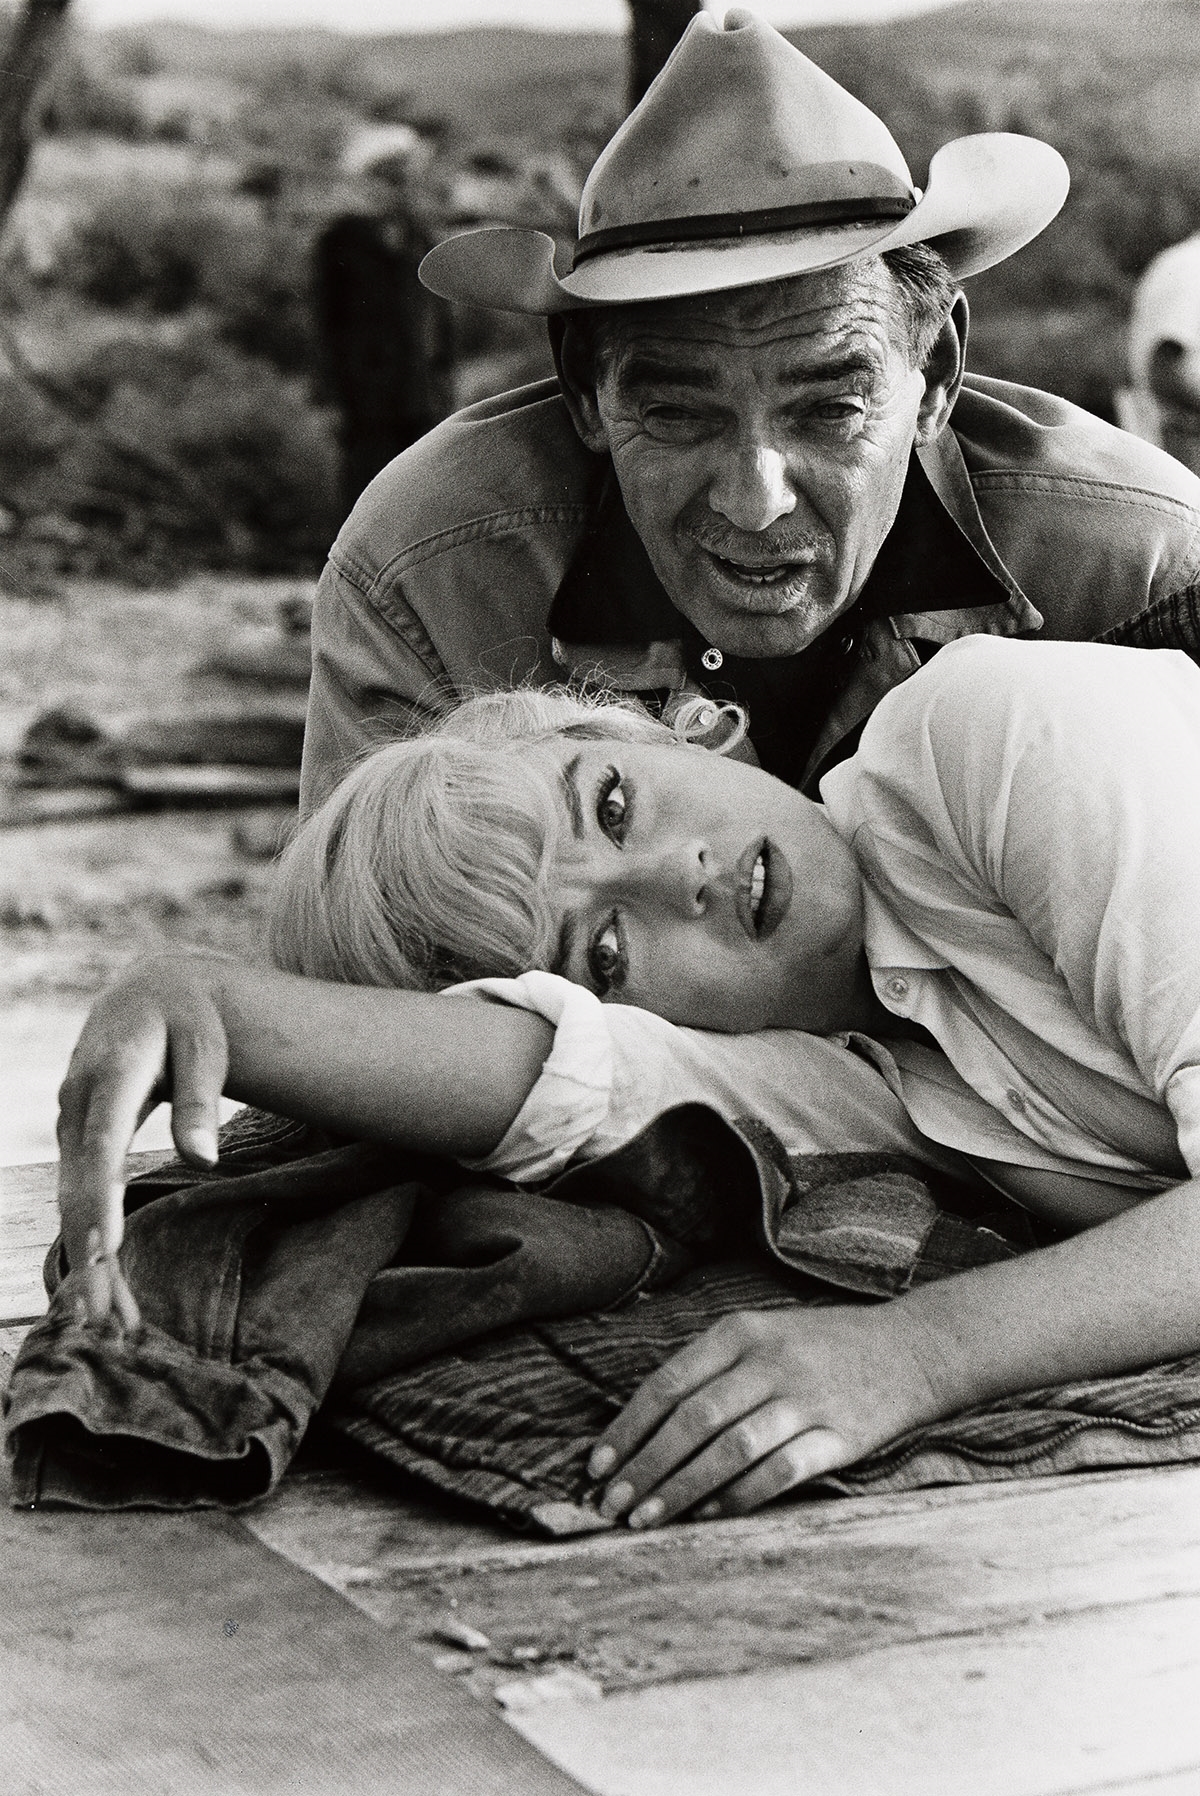 Clark Gable and Marilyn Monroe on the set of The Misfits, Nevada.